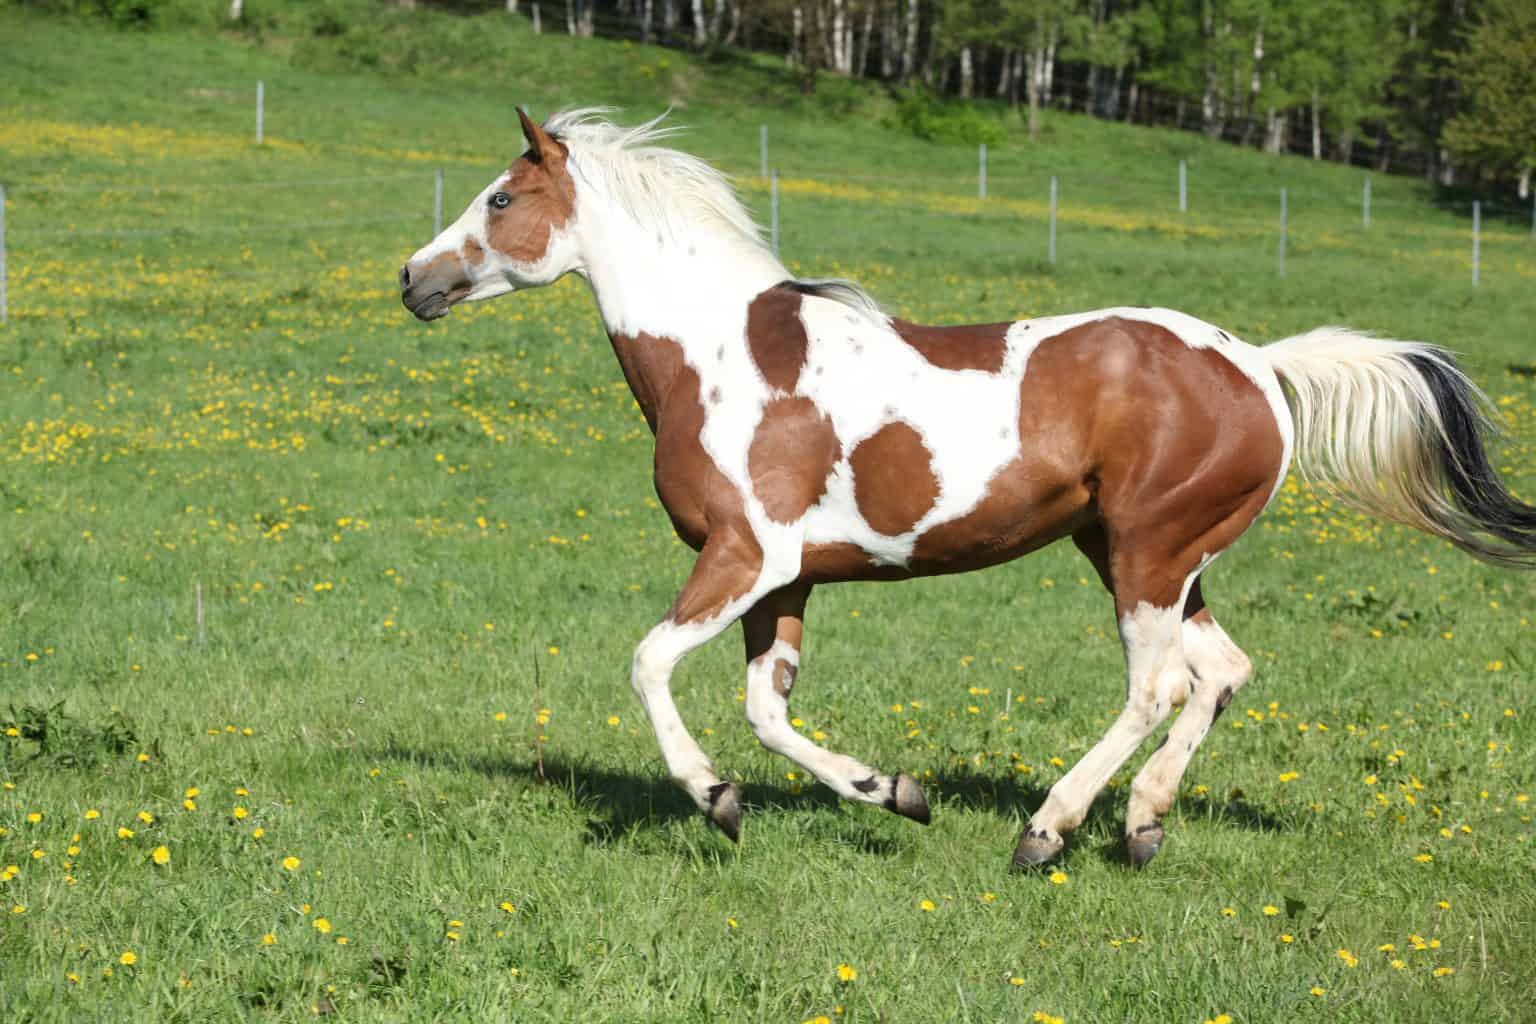 8 Interesting Facts About The Paint Horse You Probably